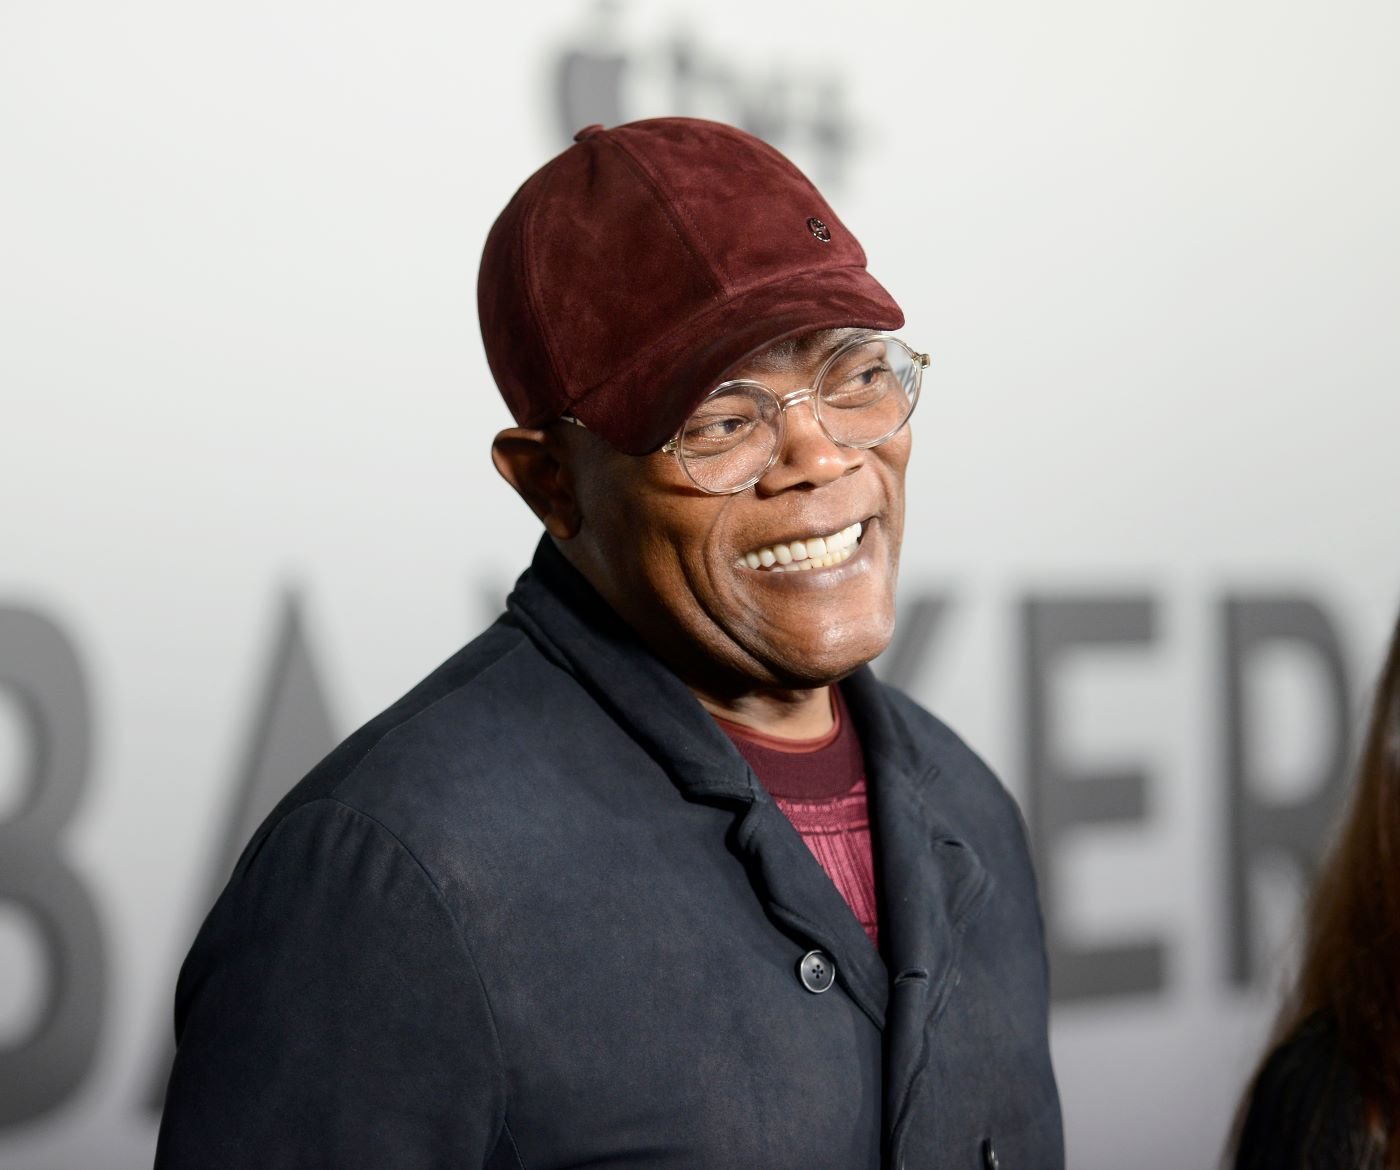 Samuel L. Jackson standing in front of a white and black background wearing a burgundy baseball hate and shirt with a black suit jacket.